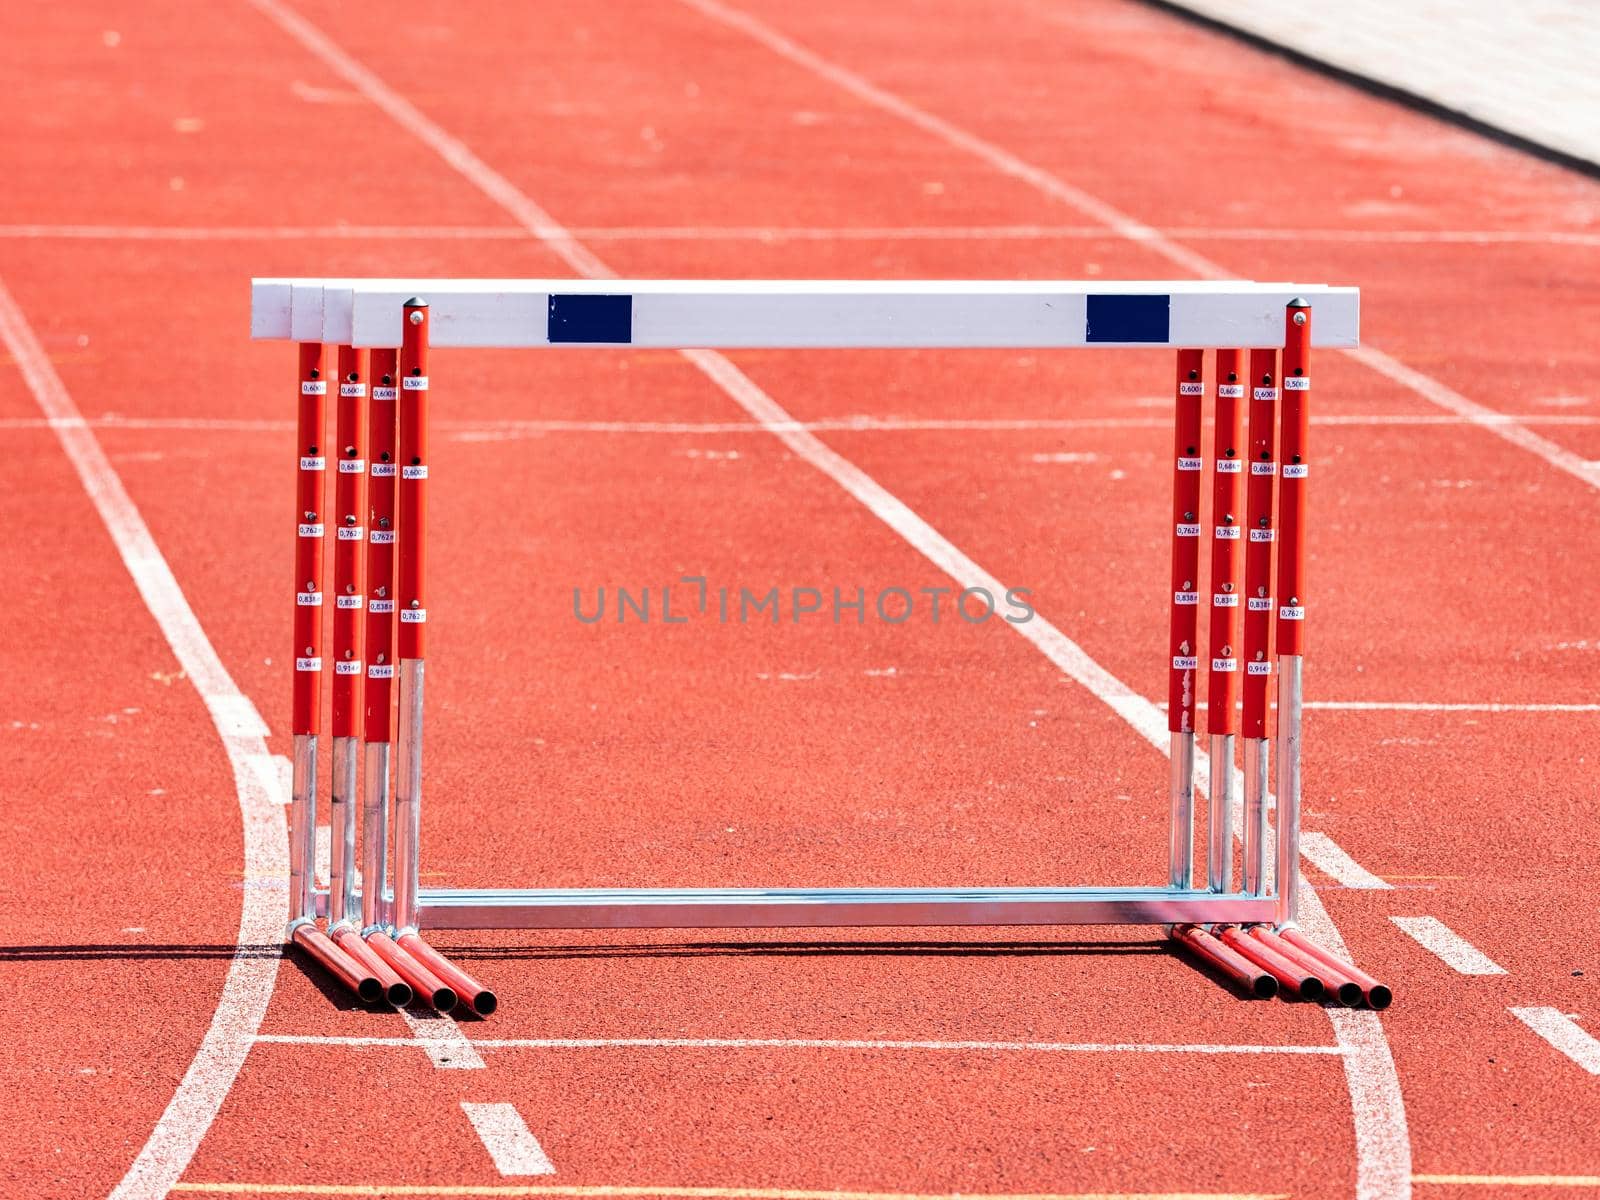 Hurdles and red running tracks in a stadion by rdonar2